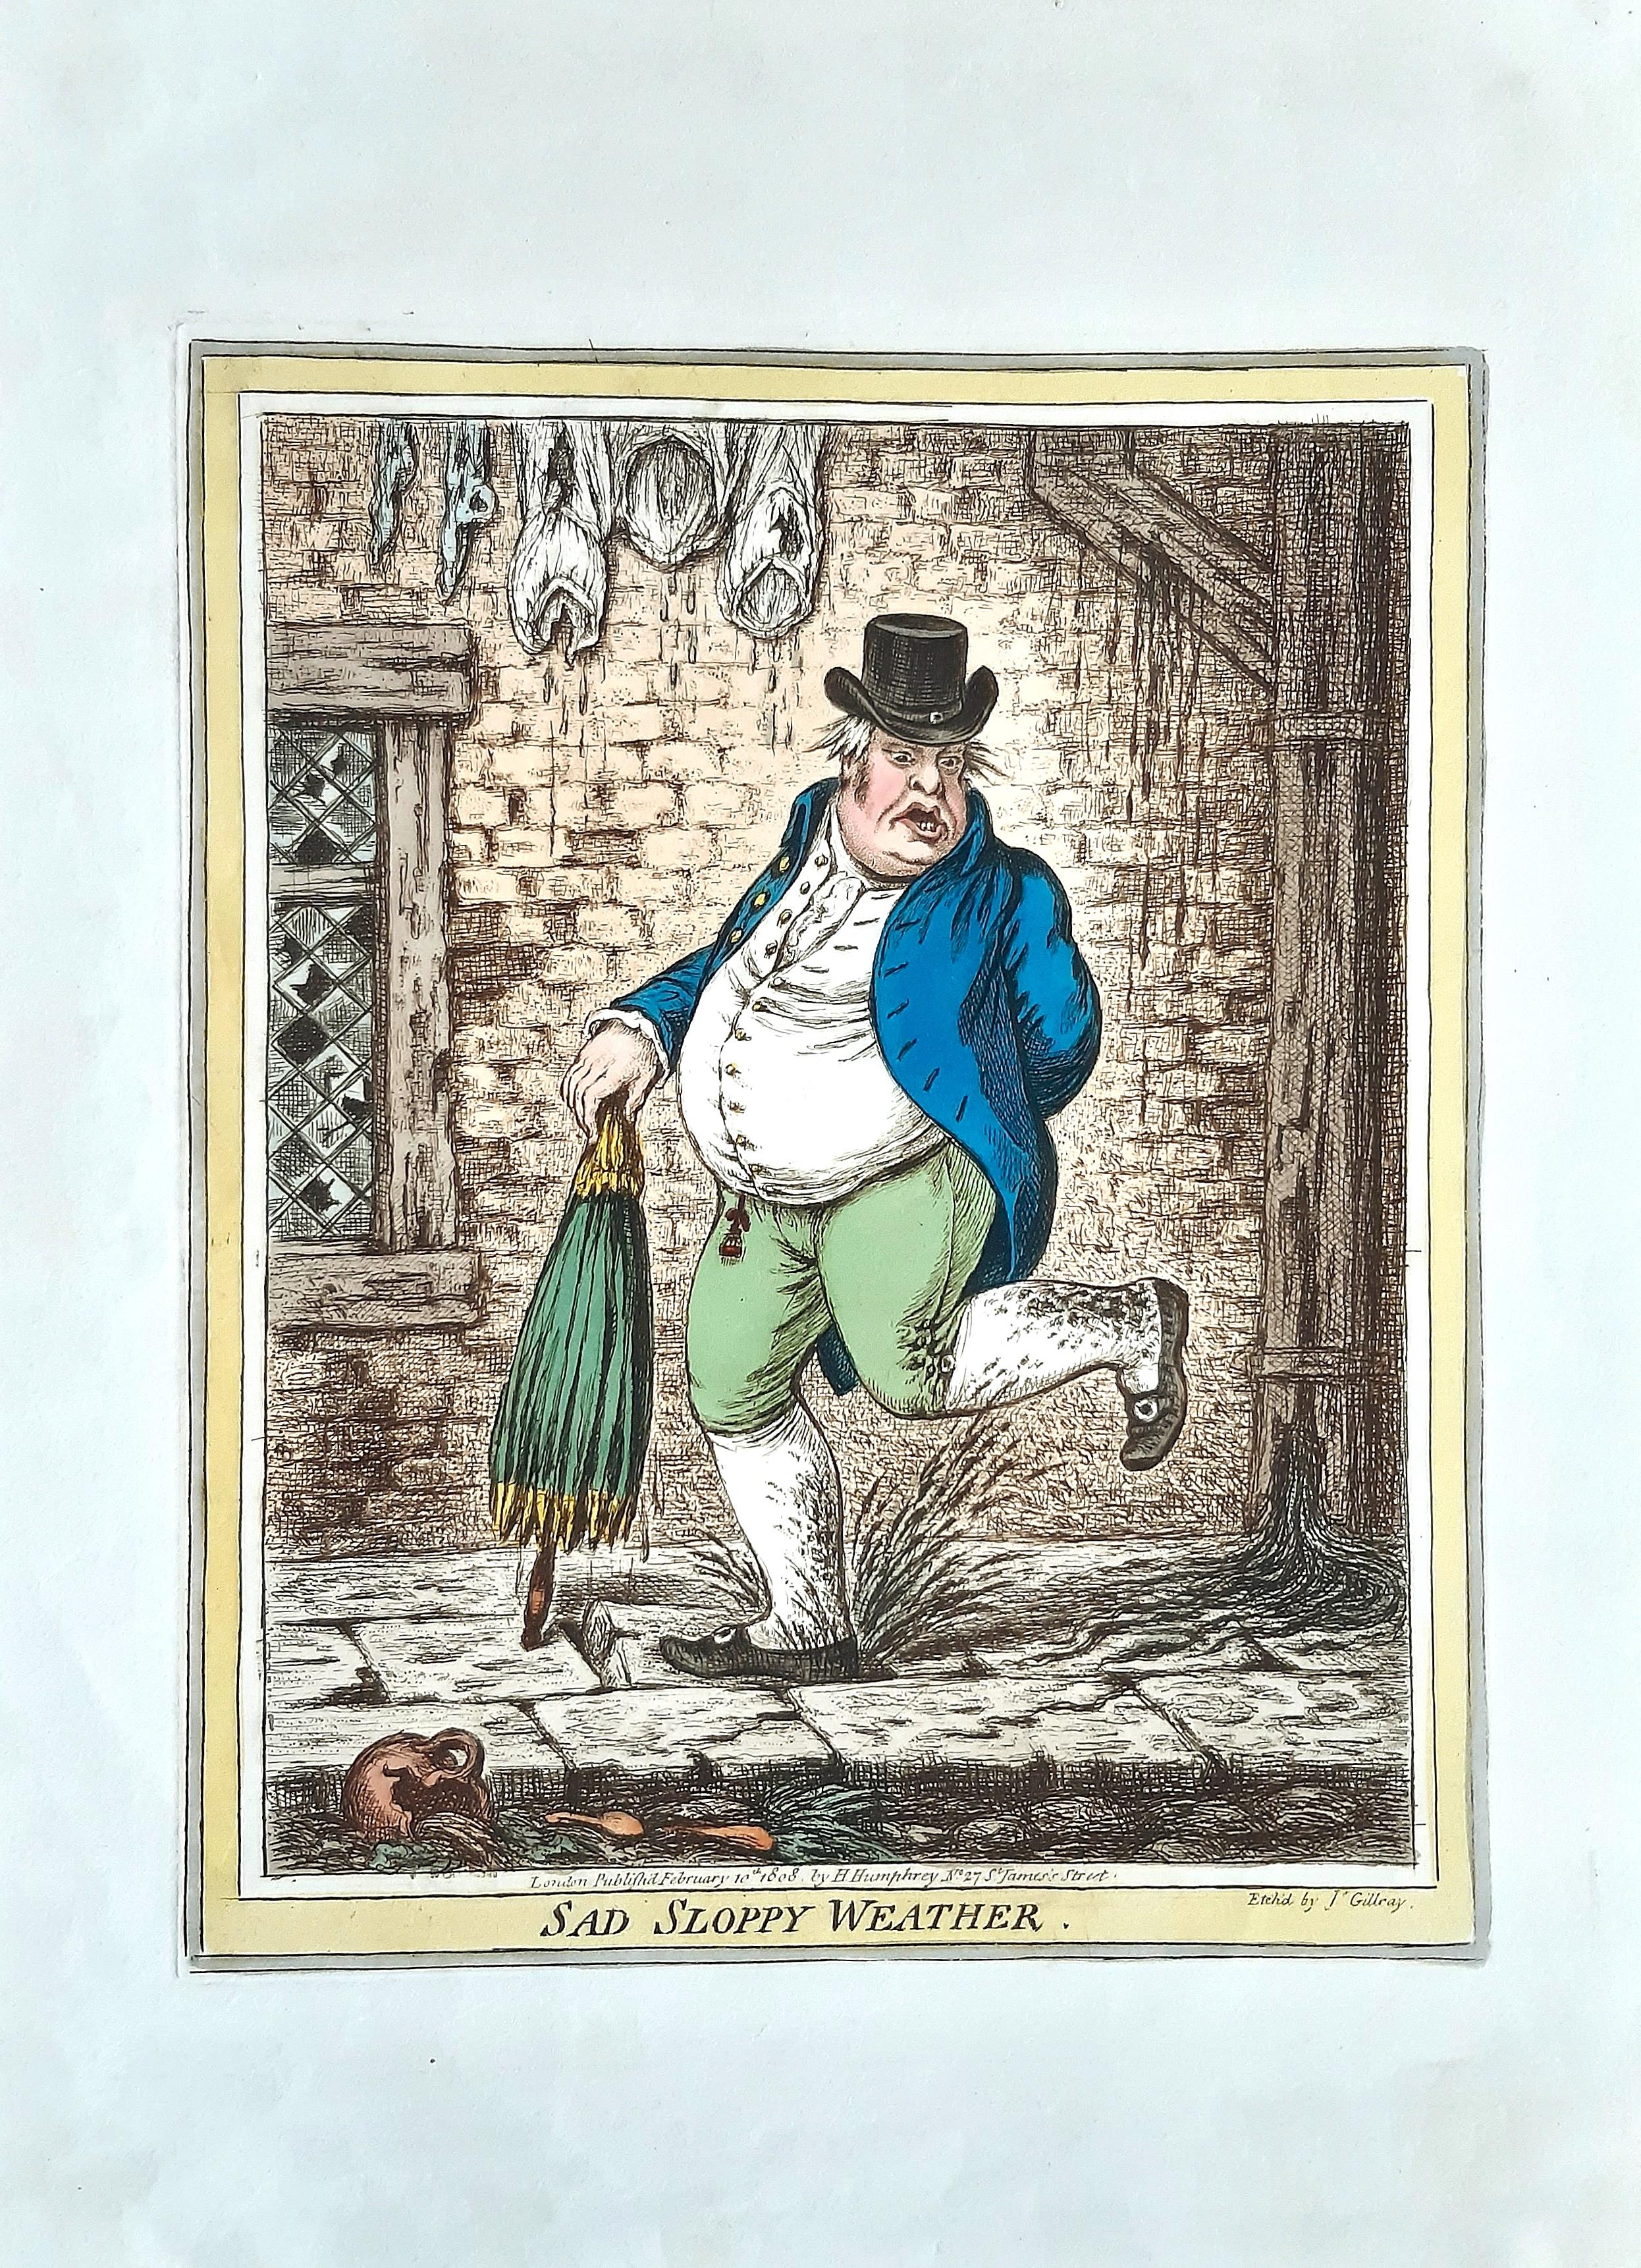 Delicious Weather - Complete Series of 5 Hand-colored Etchings - 1808 - Print by James Gillray